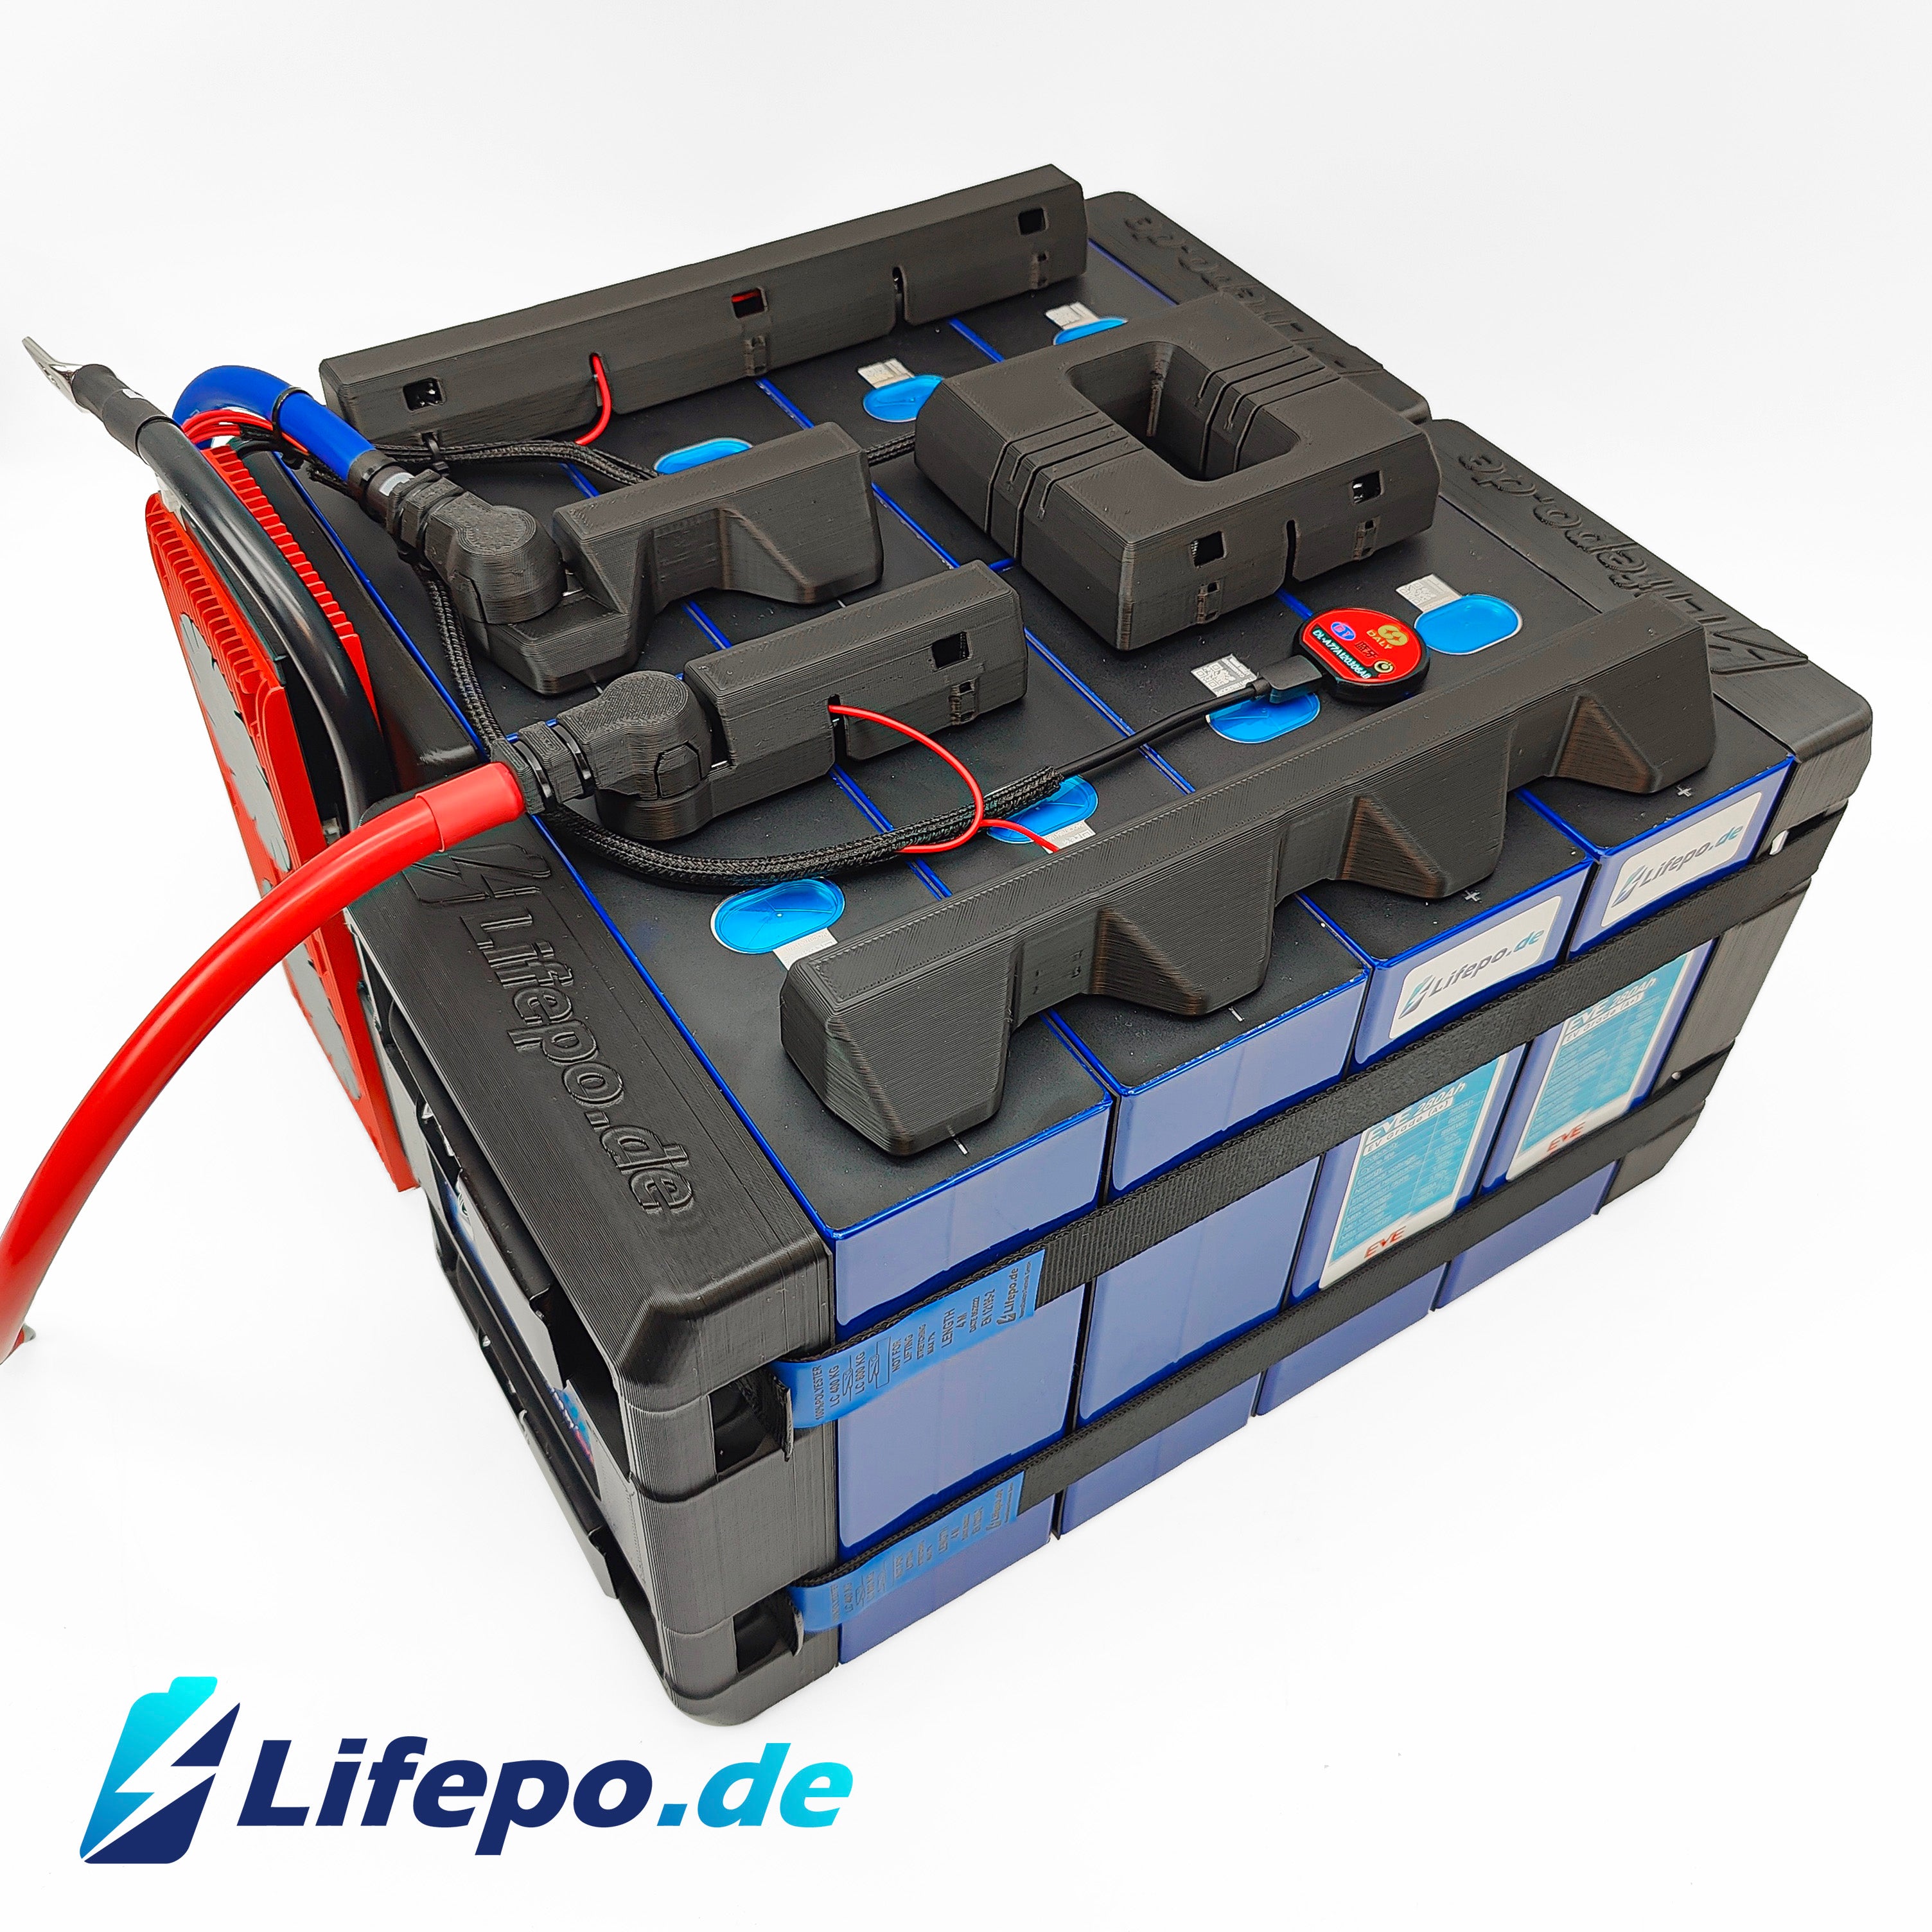 12v 560Ah Lifepo4 battery system with EVE Grade A+ 7.6kWh - double row